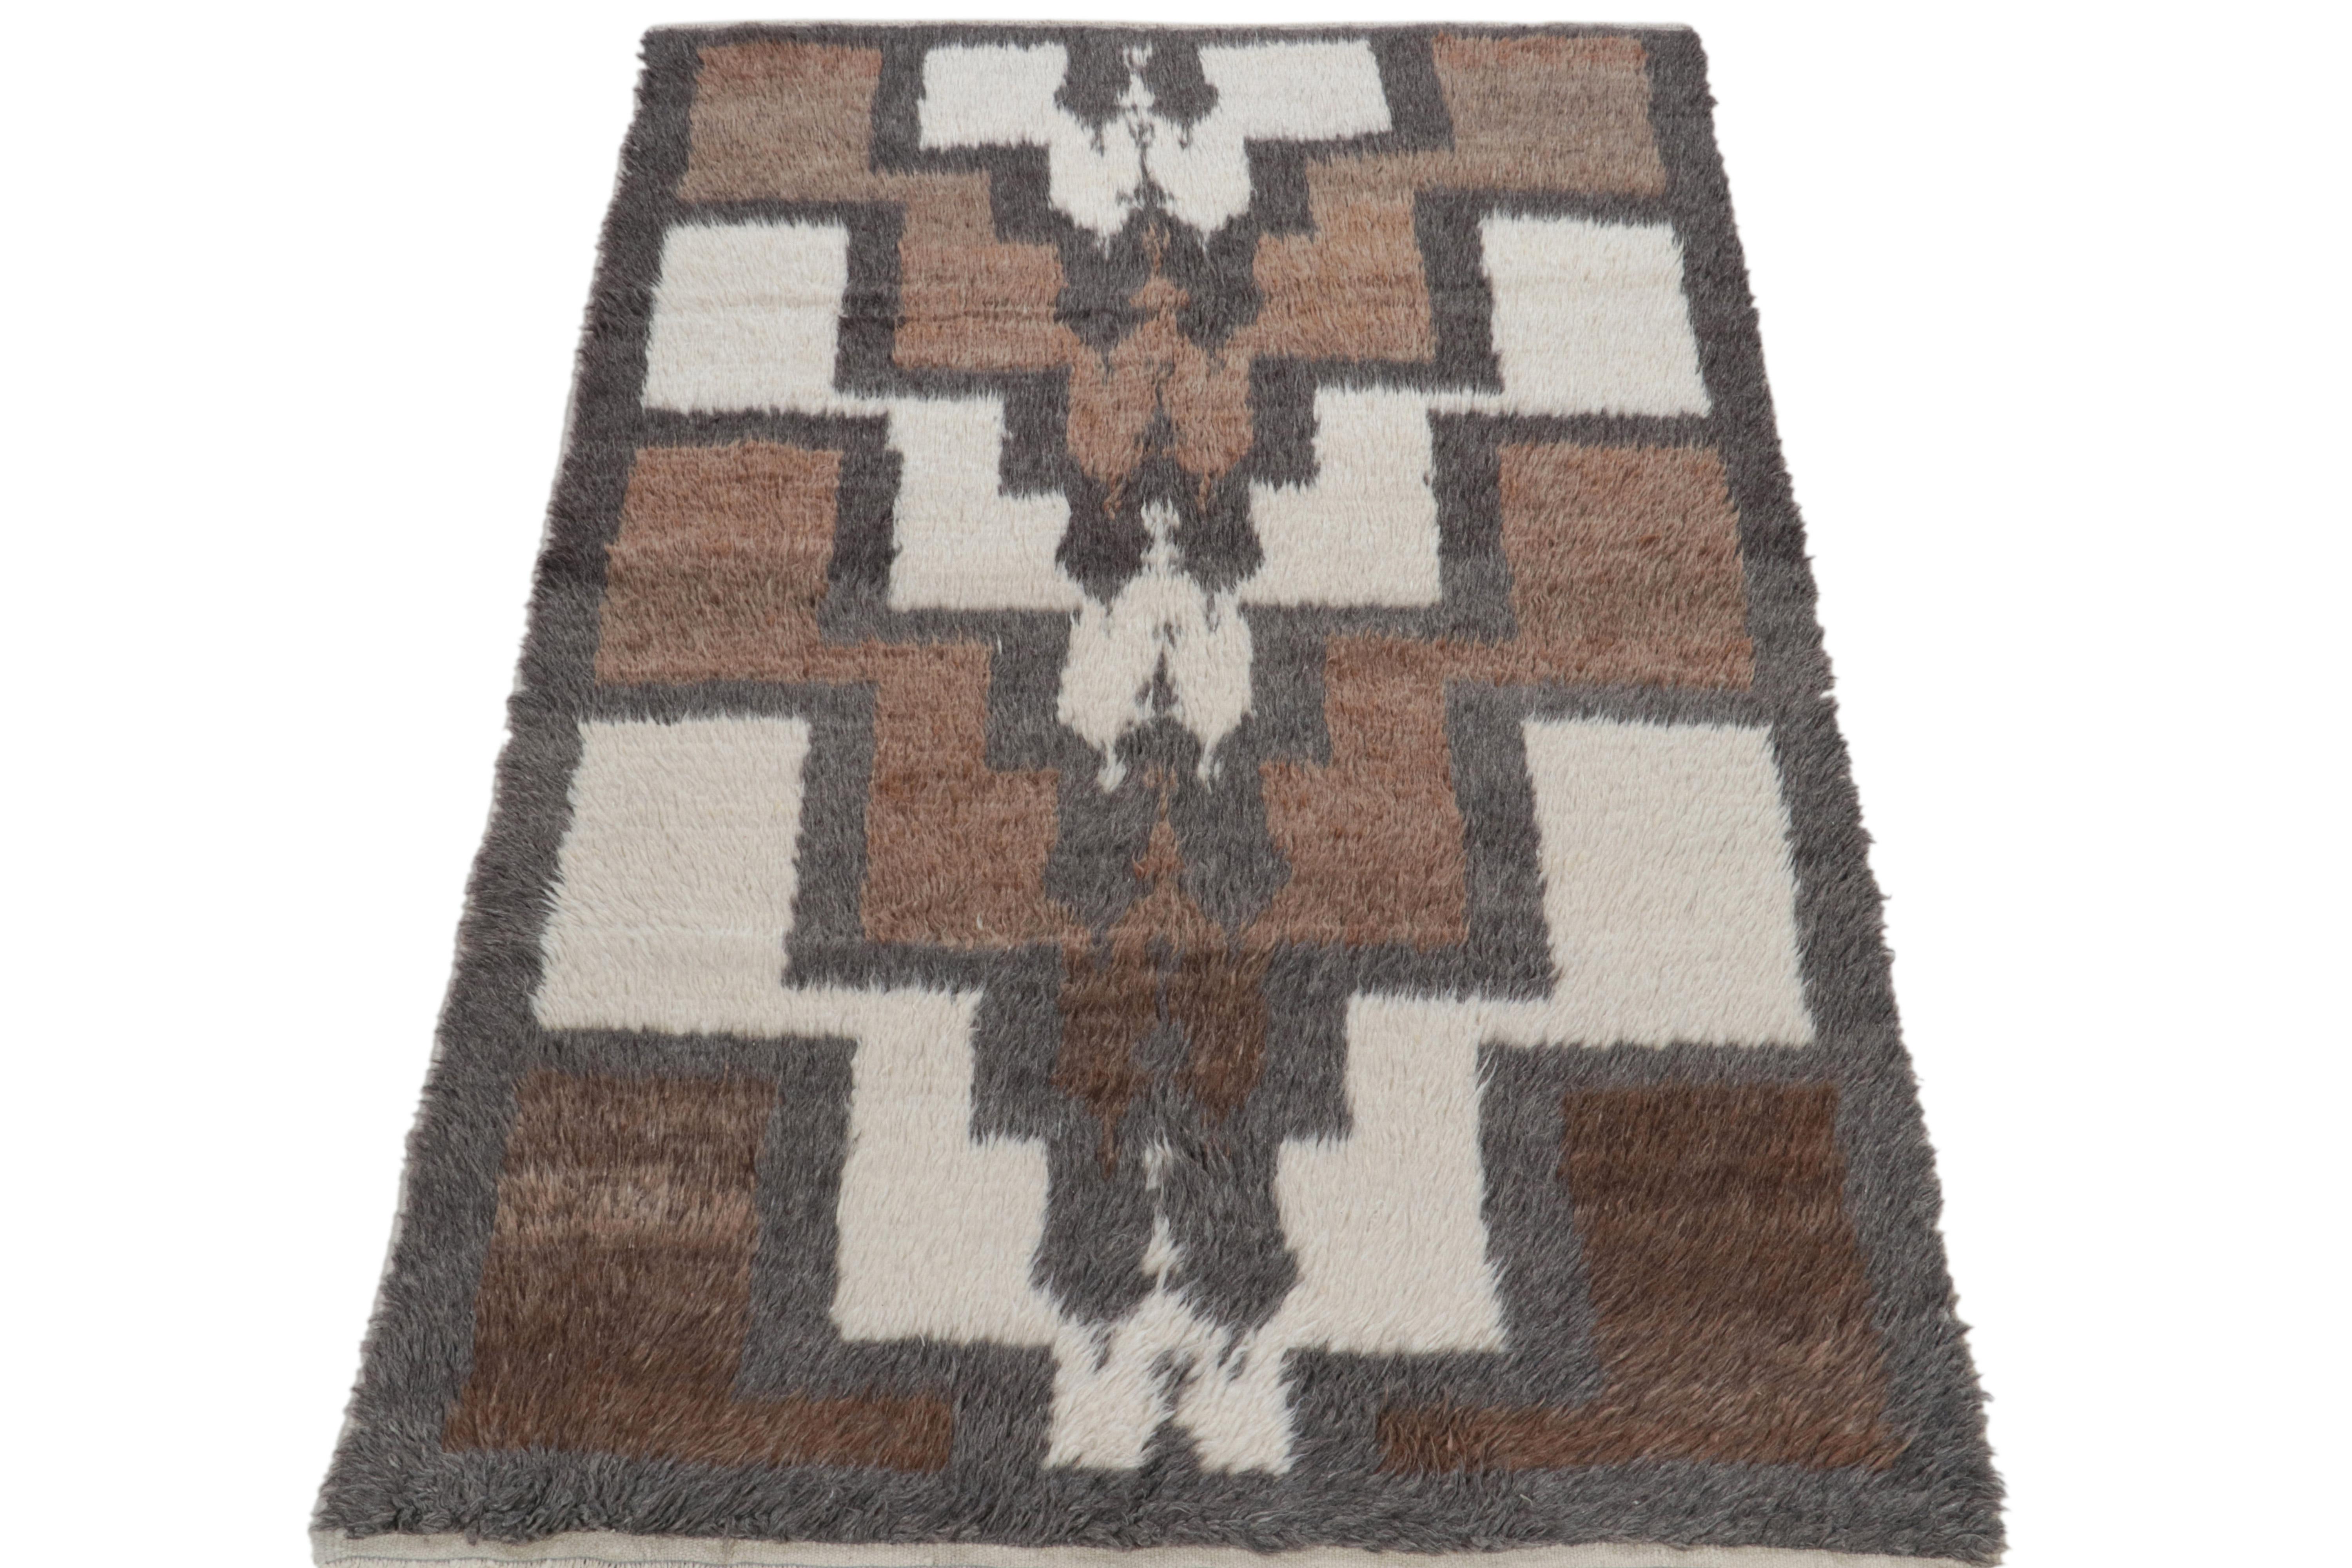 A 4x7 vintage Tulu tribal rug from Turkey entering Rug & Kilim’s Antique & Vintage collection. The piece is hand-knotted in a fine shag pile with high low texturability on the border for enhancing the appeal of the tribal geometric pattern of the